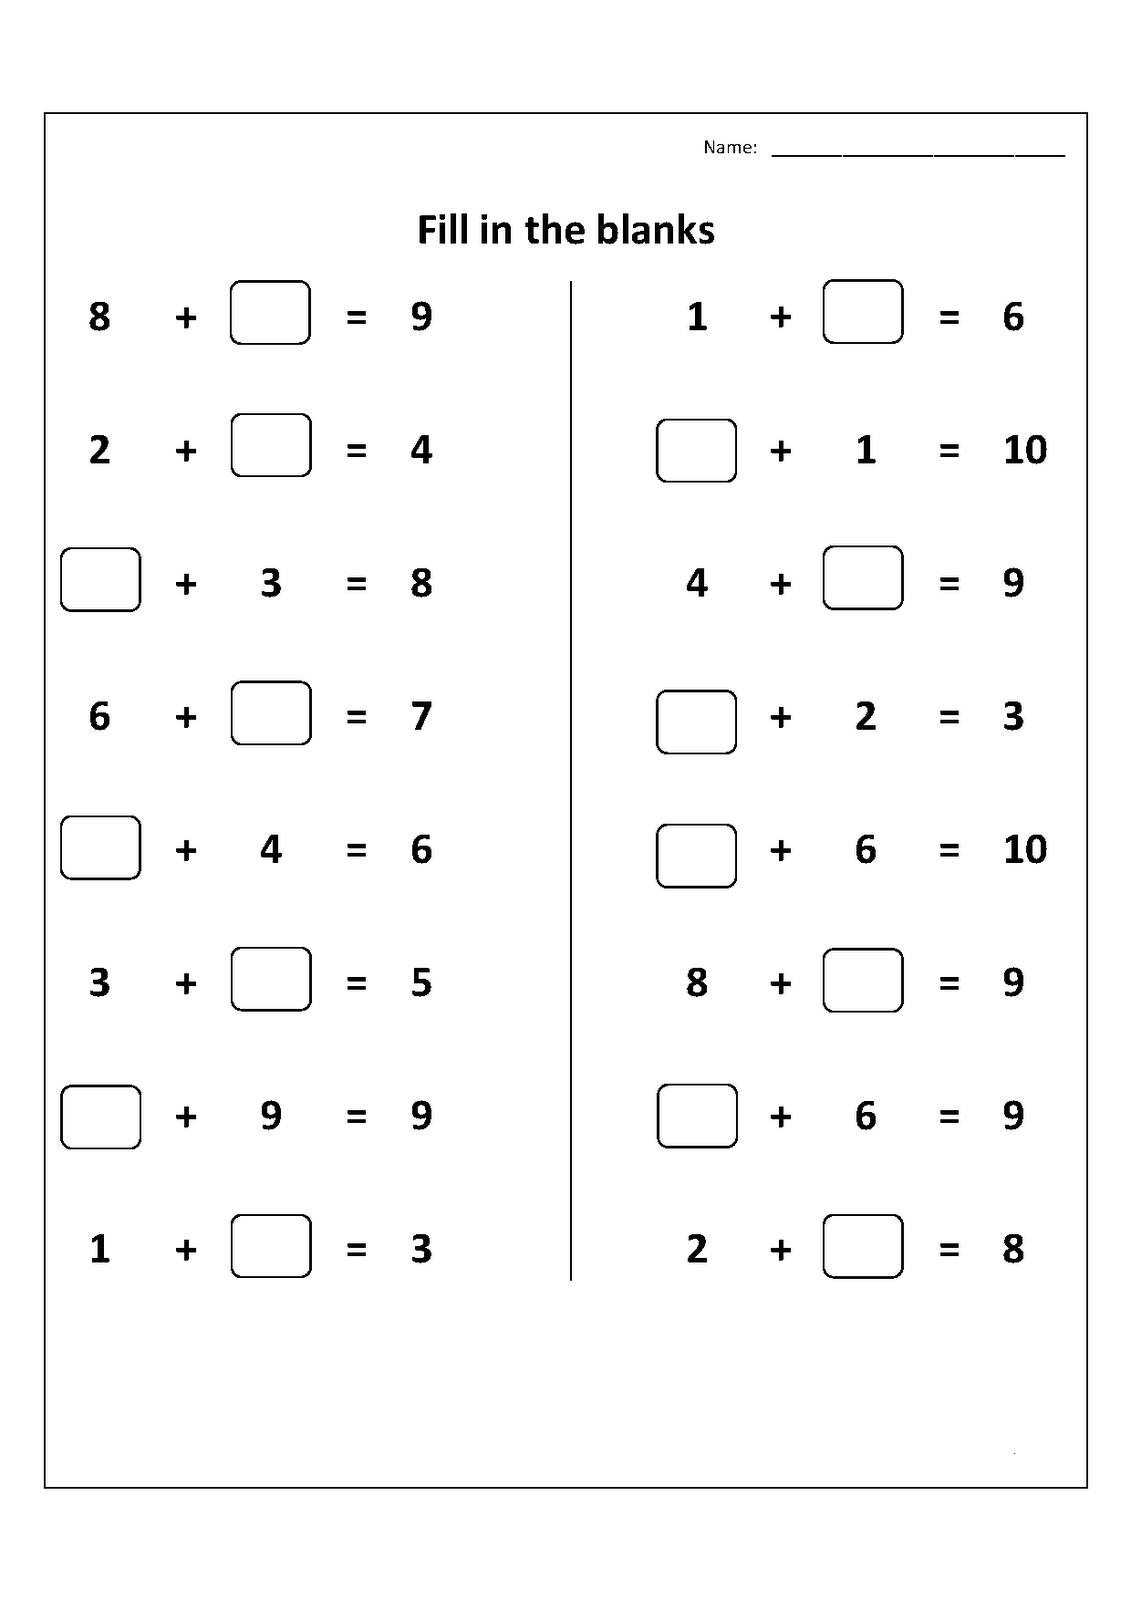 free coloring pages grade 1 1st grade worksheets best coloring pages for kids grade free 1 coloring pages 